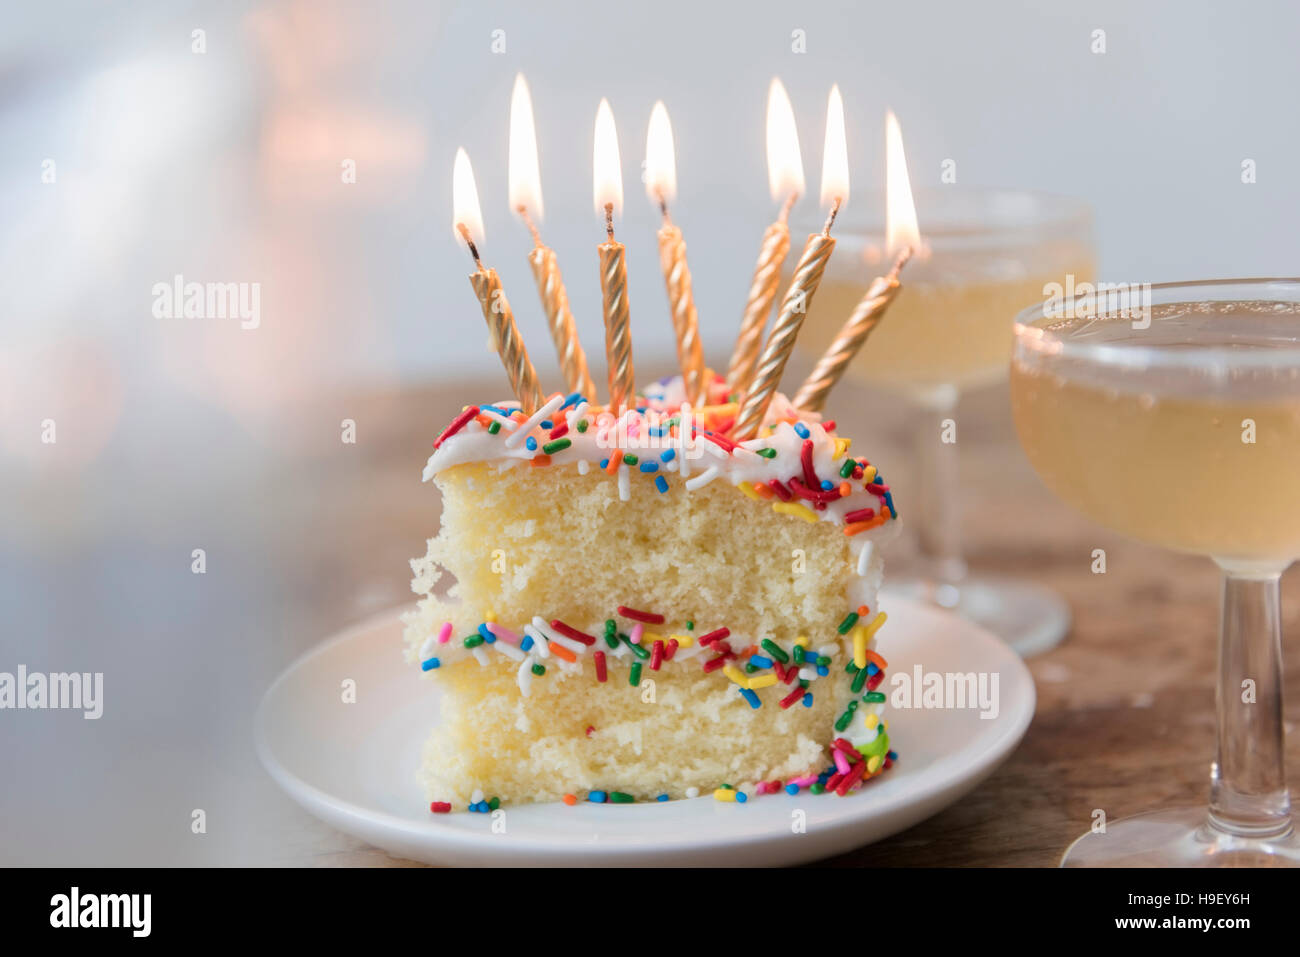 Candles burning on slice of cake with sprinkles near champagne Stock Photo